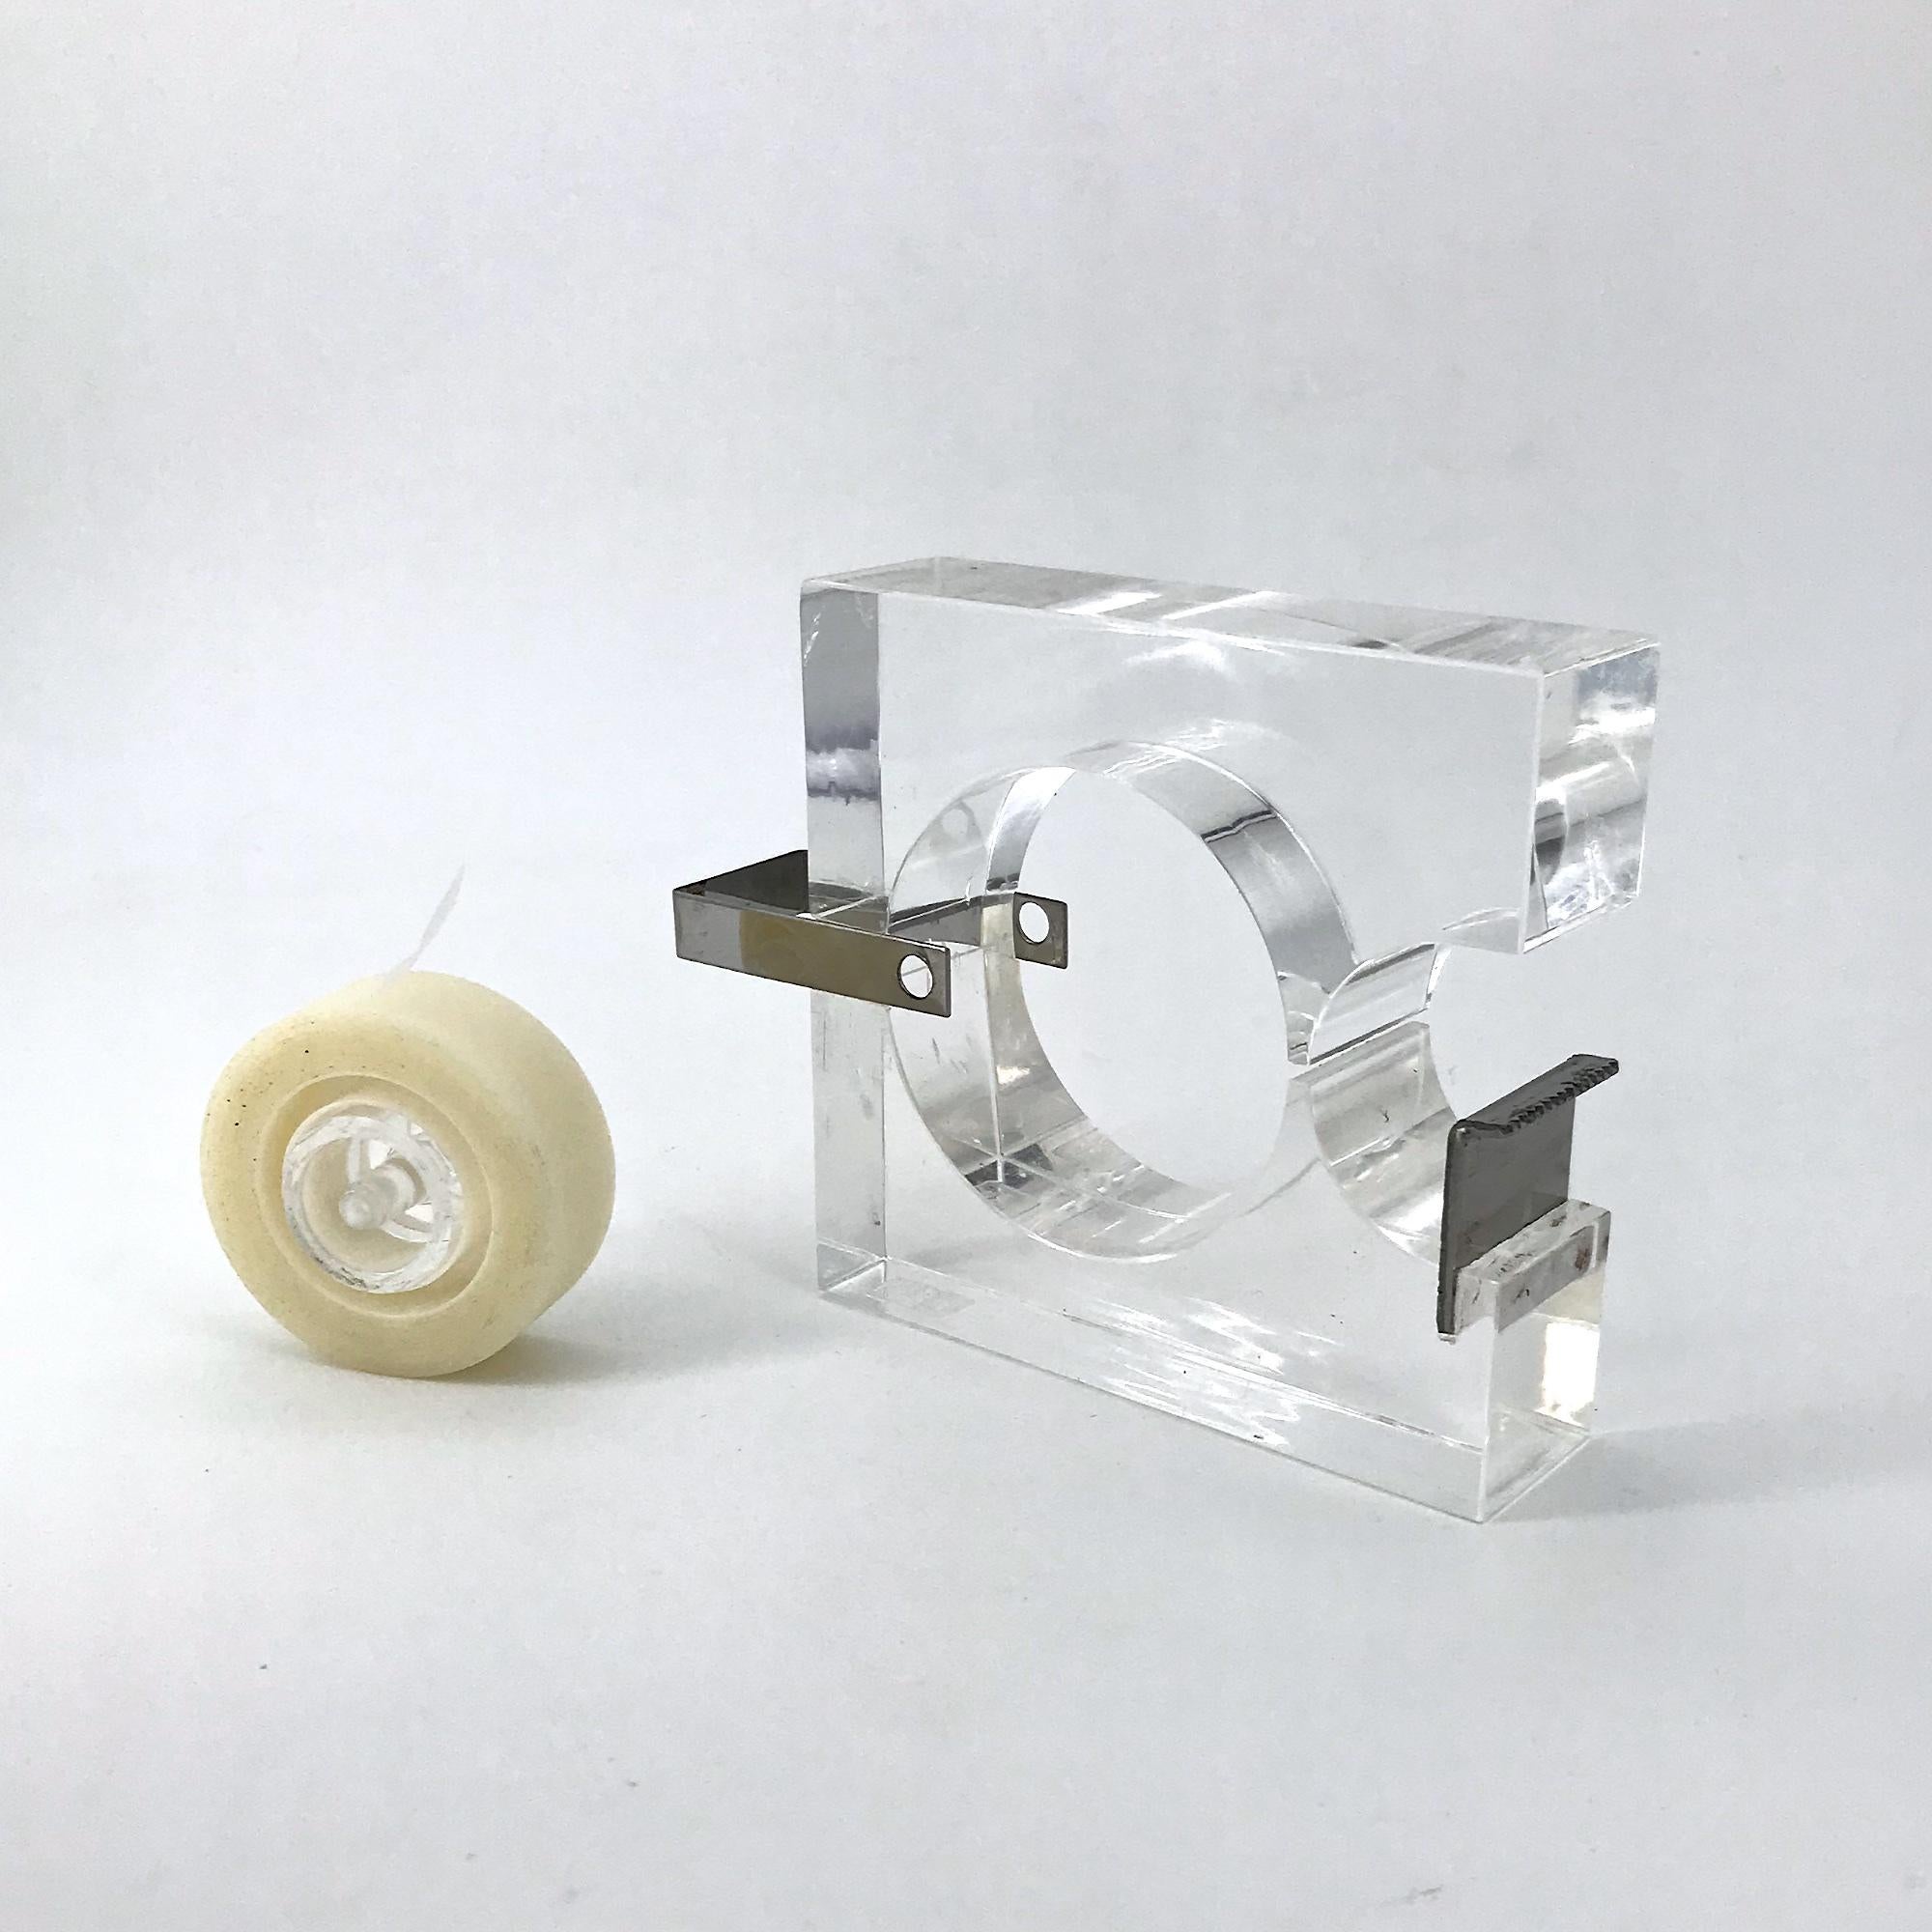 1970s Lucite Tape Dispenser by Two's Company for Serge Mansau Paris MOMA Design 2